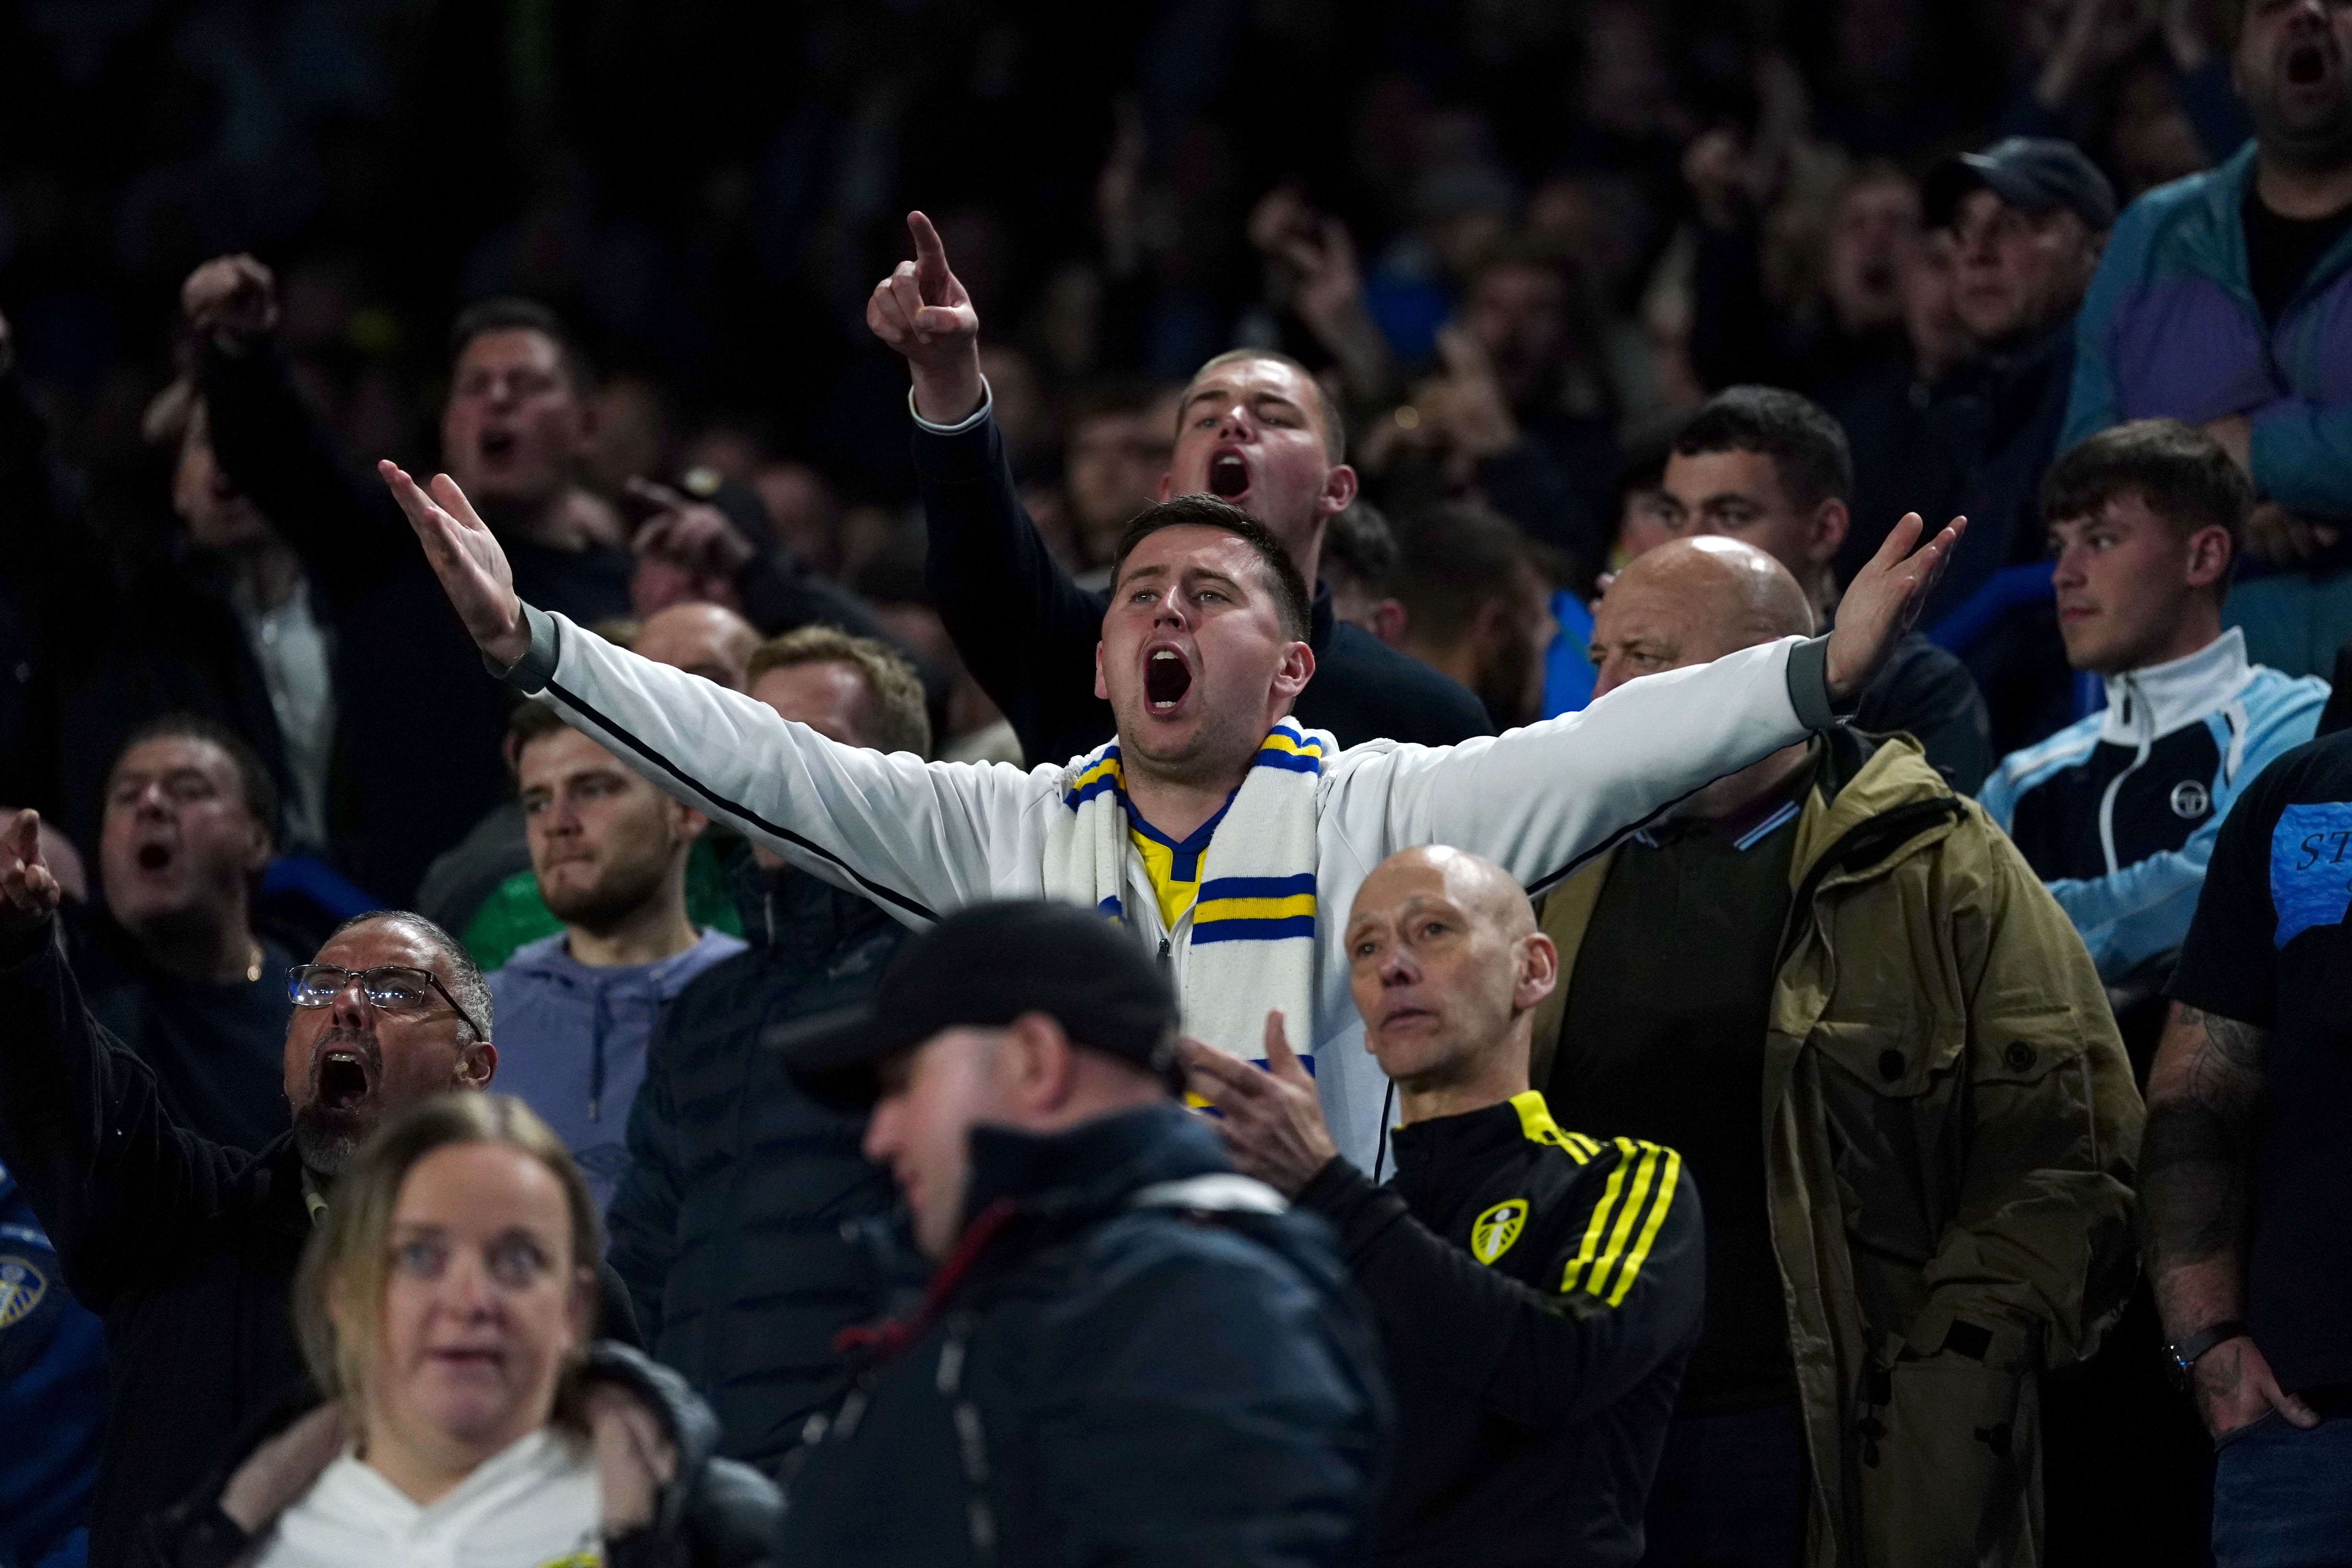 Leeds fans have grown increasingly frustrated by their club’s plight this season (Nick Potts/PA)